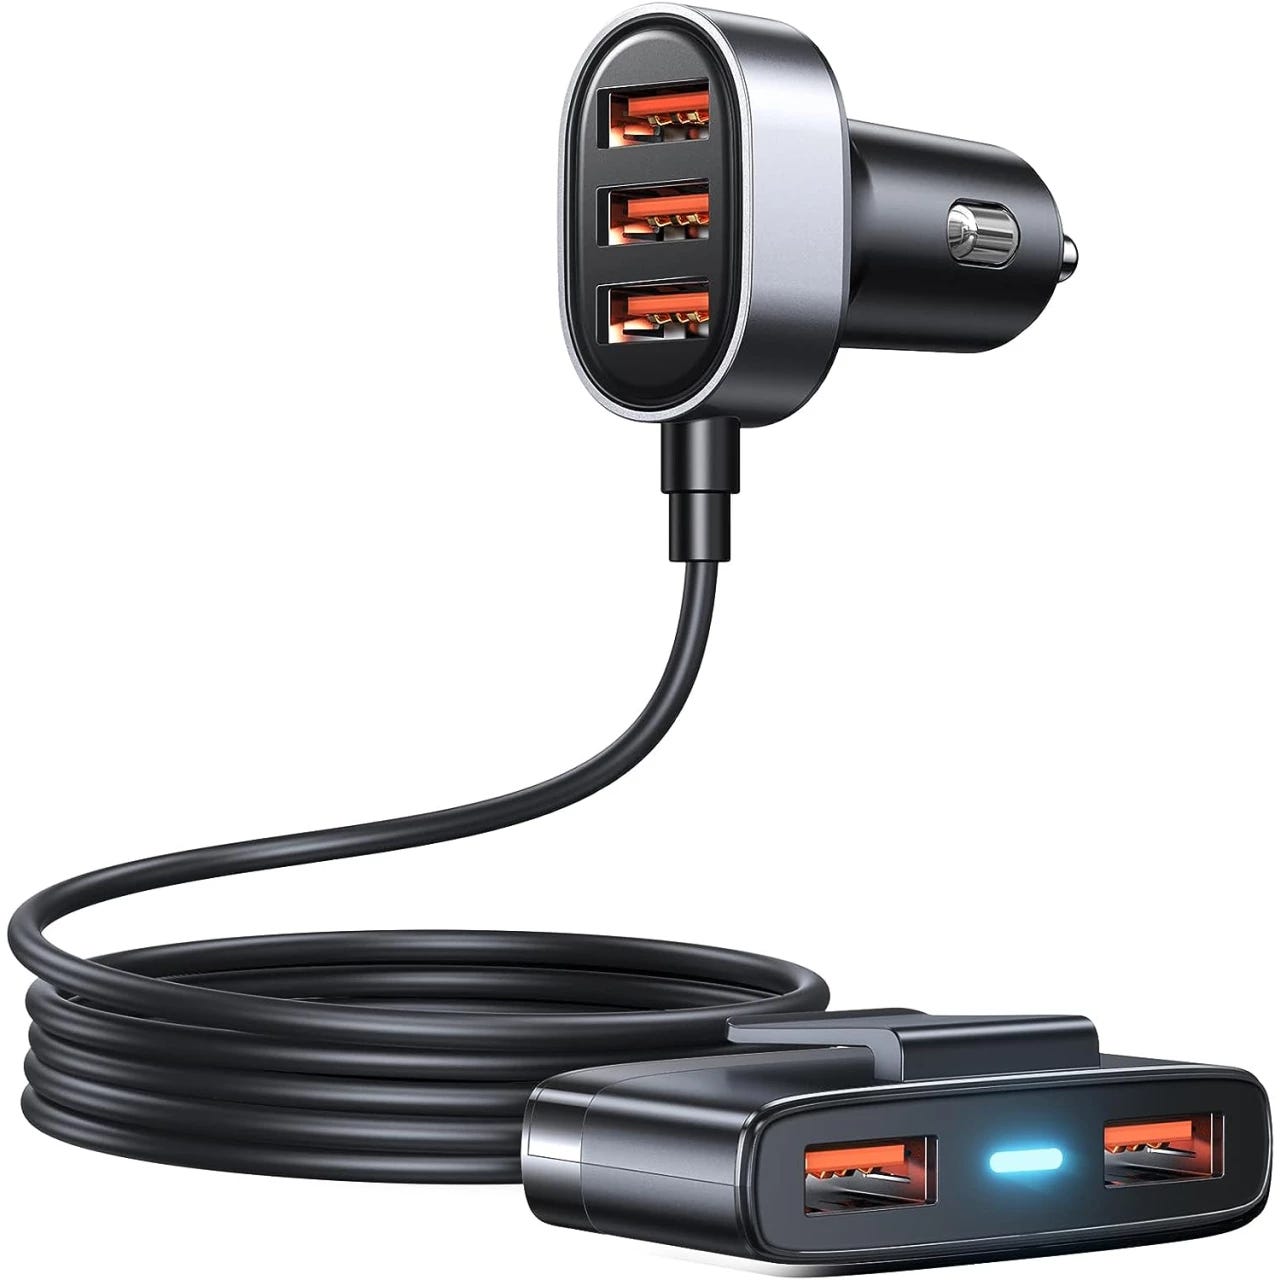 Top 5 Car Chargers in 2023: AINOPE, Fast Charge Dual Port, and More, by  Enrique